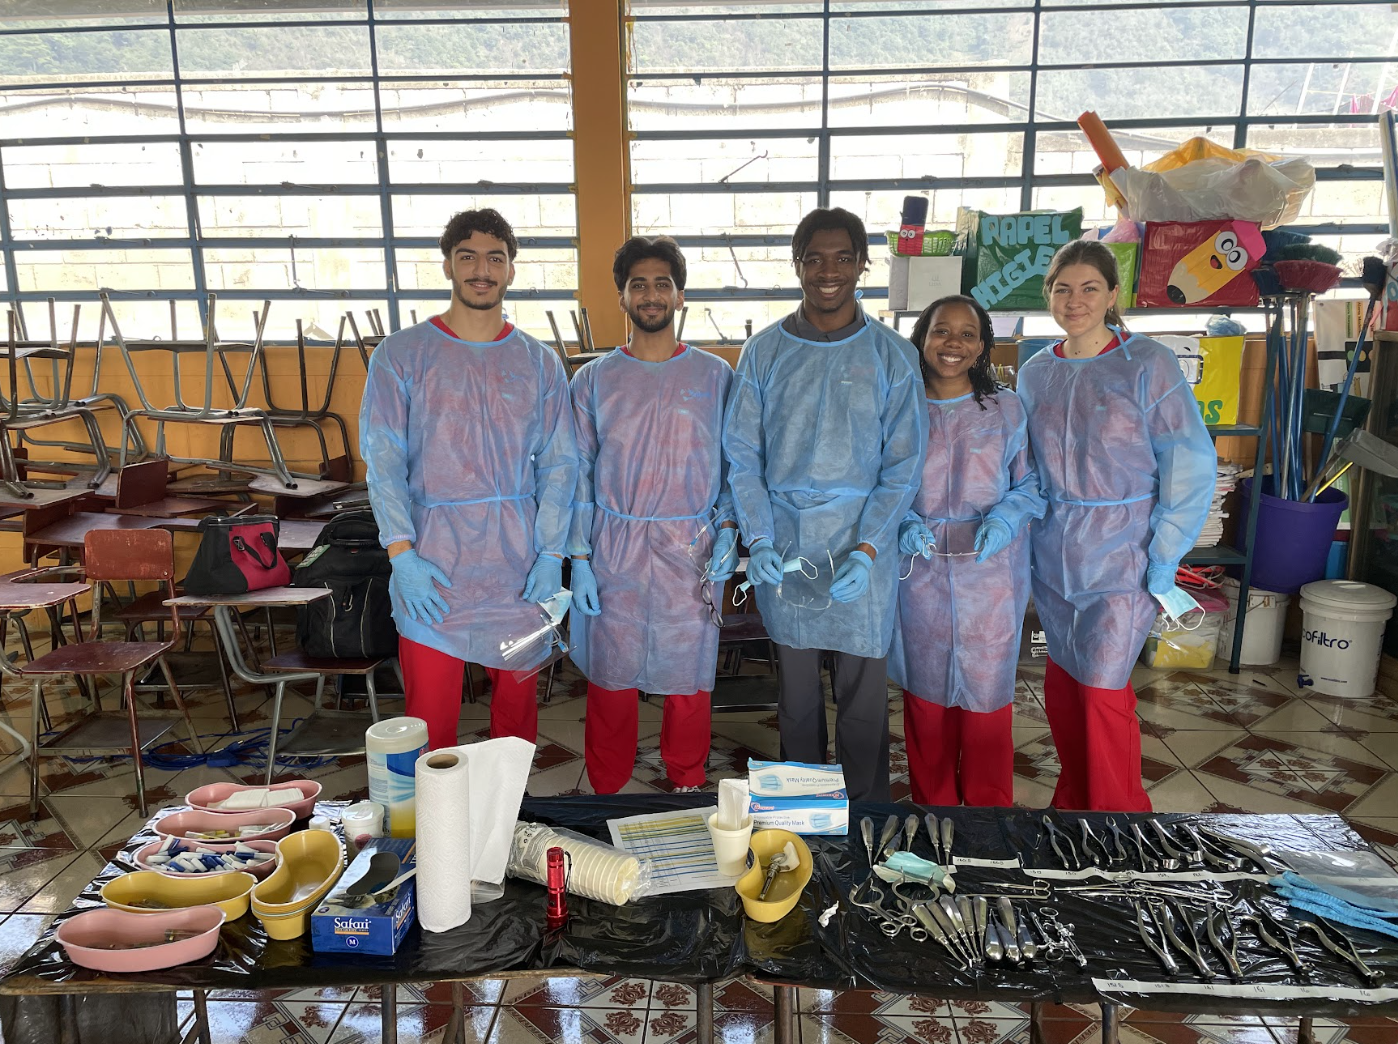 Five students in medical scrubs in front of a table of health equipment